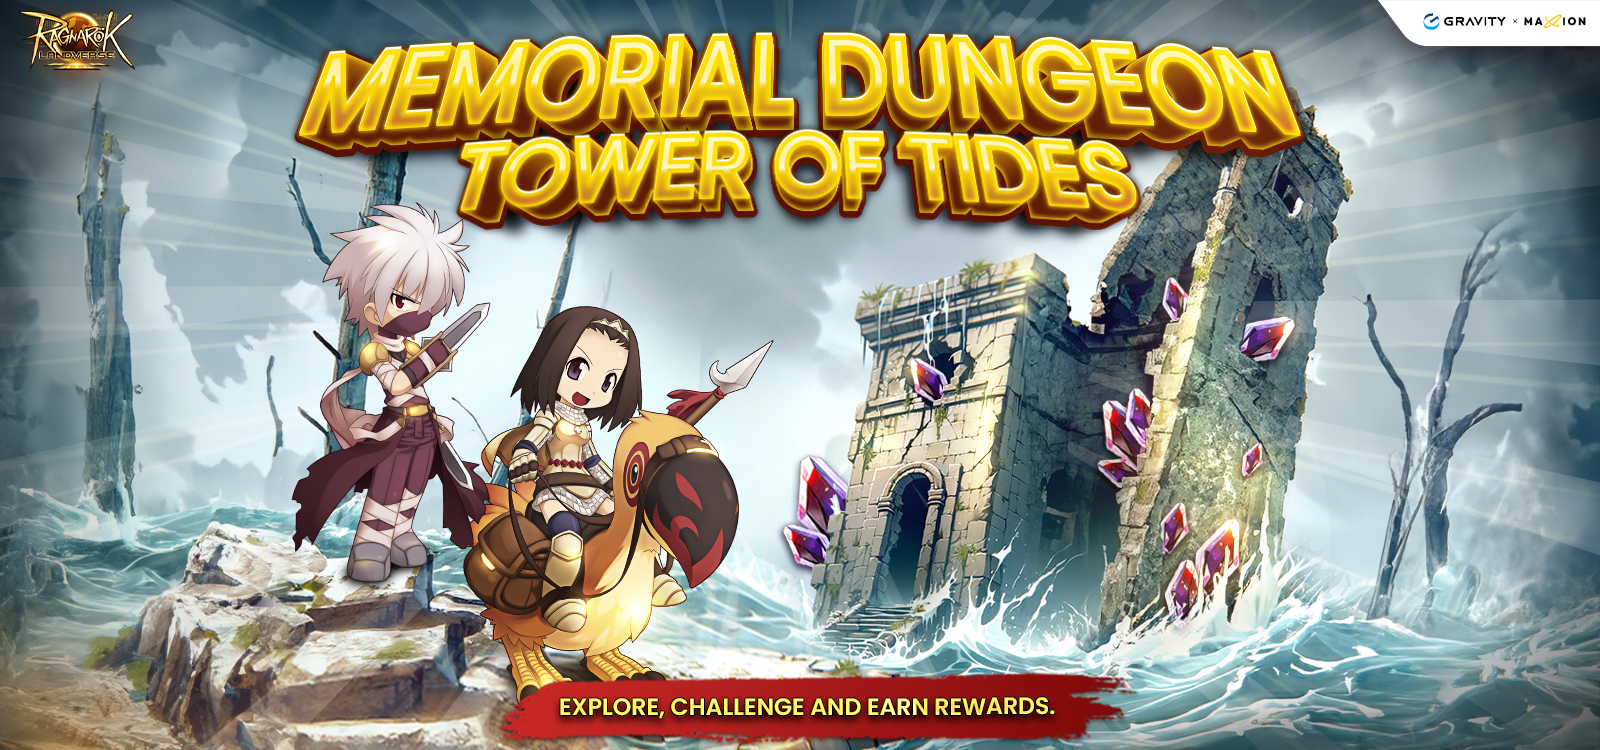 Tower Of Tides (Memorial Dungeon)